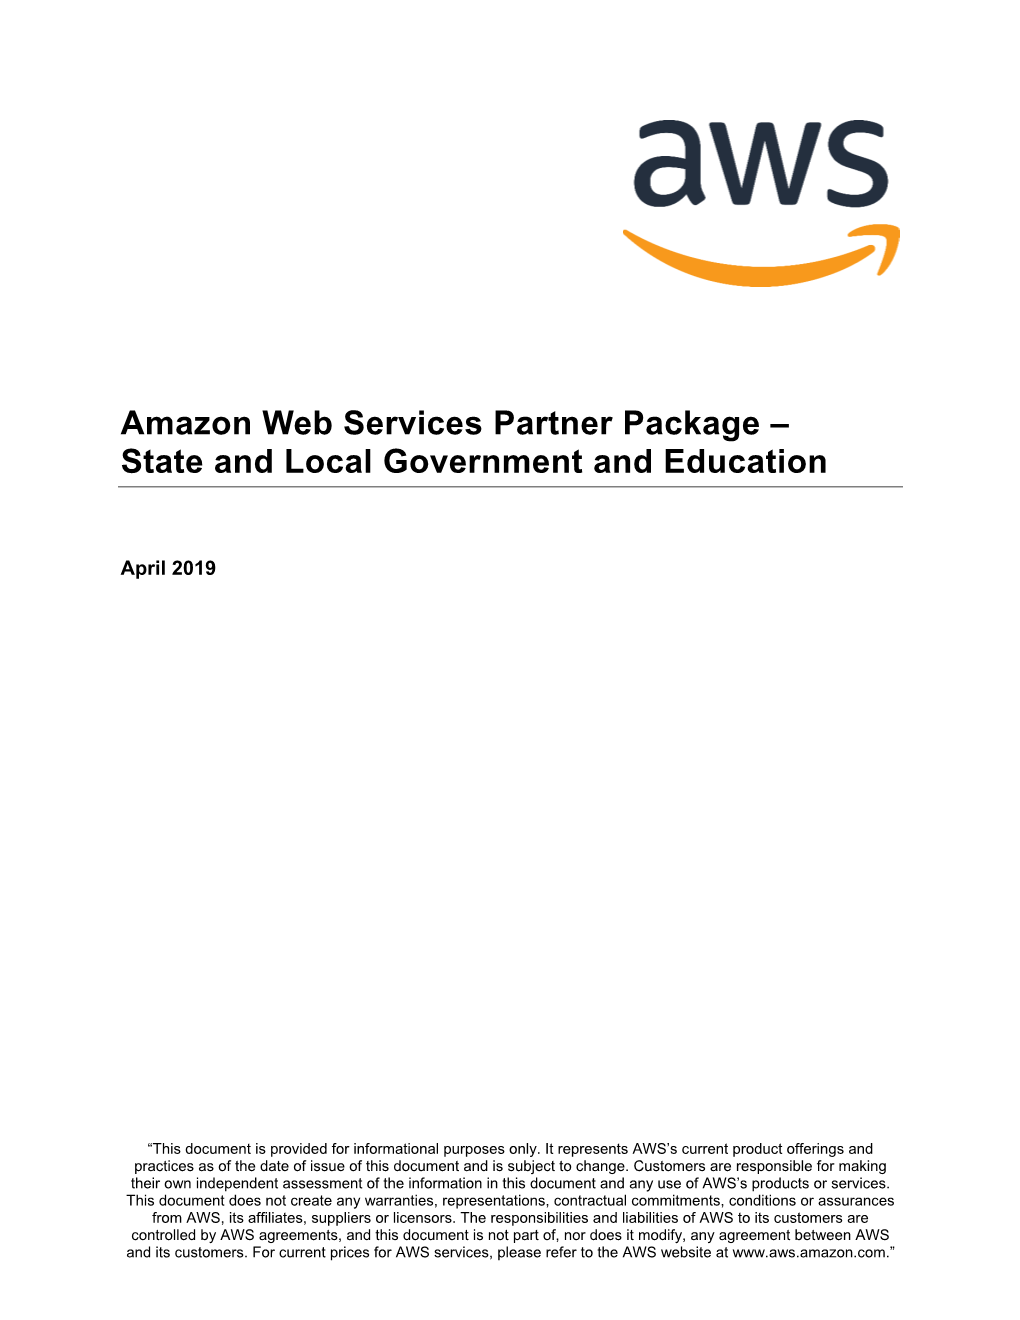 Amazon Web Services Partner Package – State and Local Government and Education